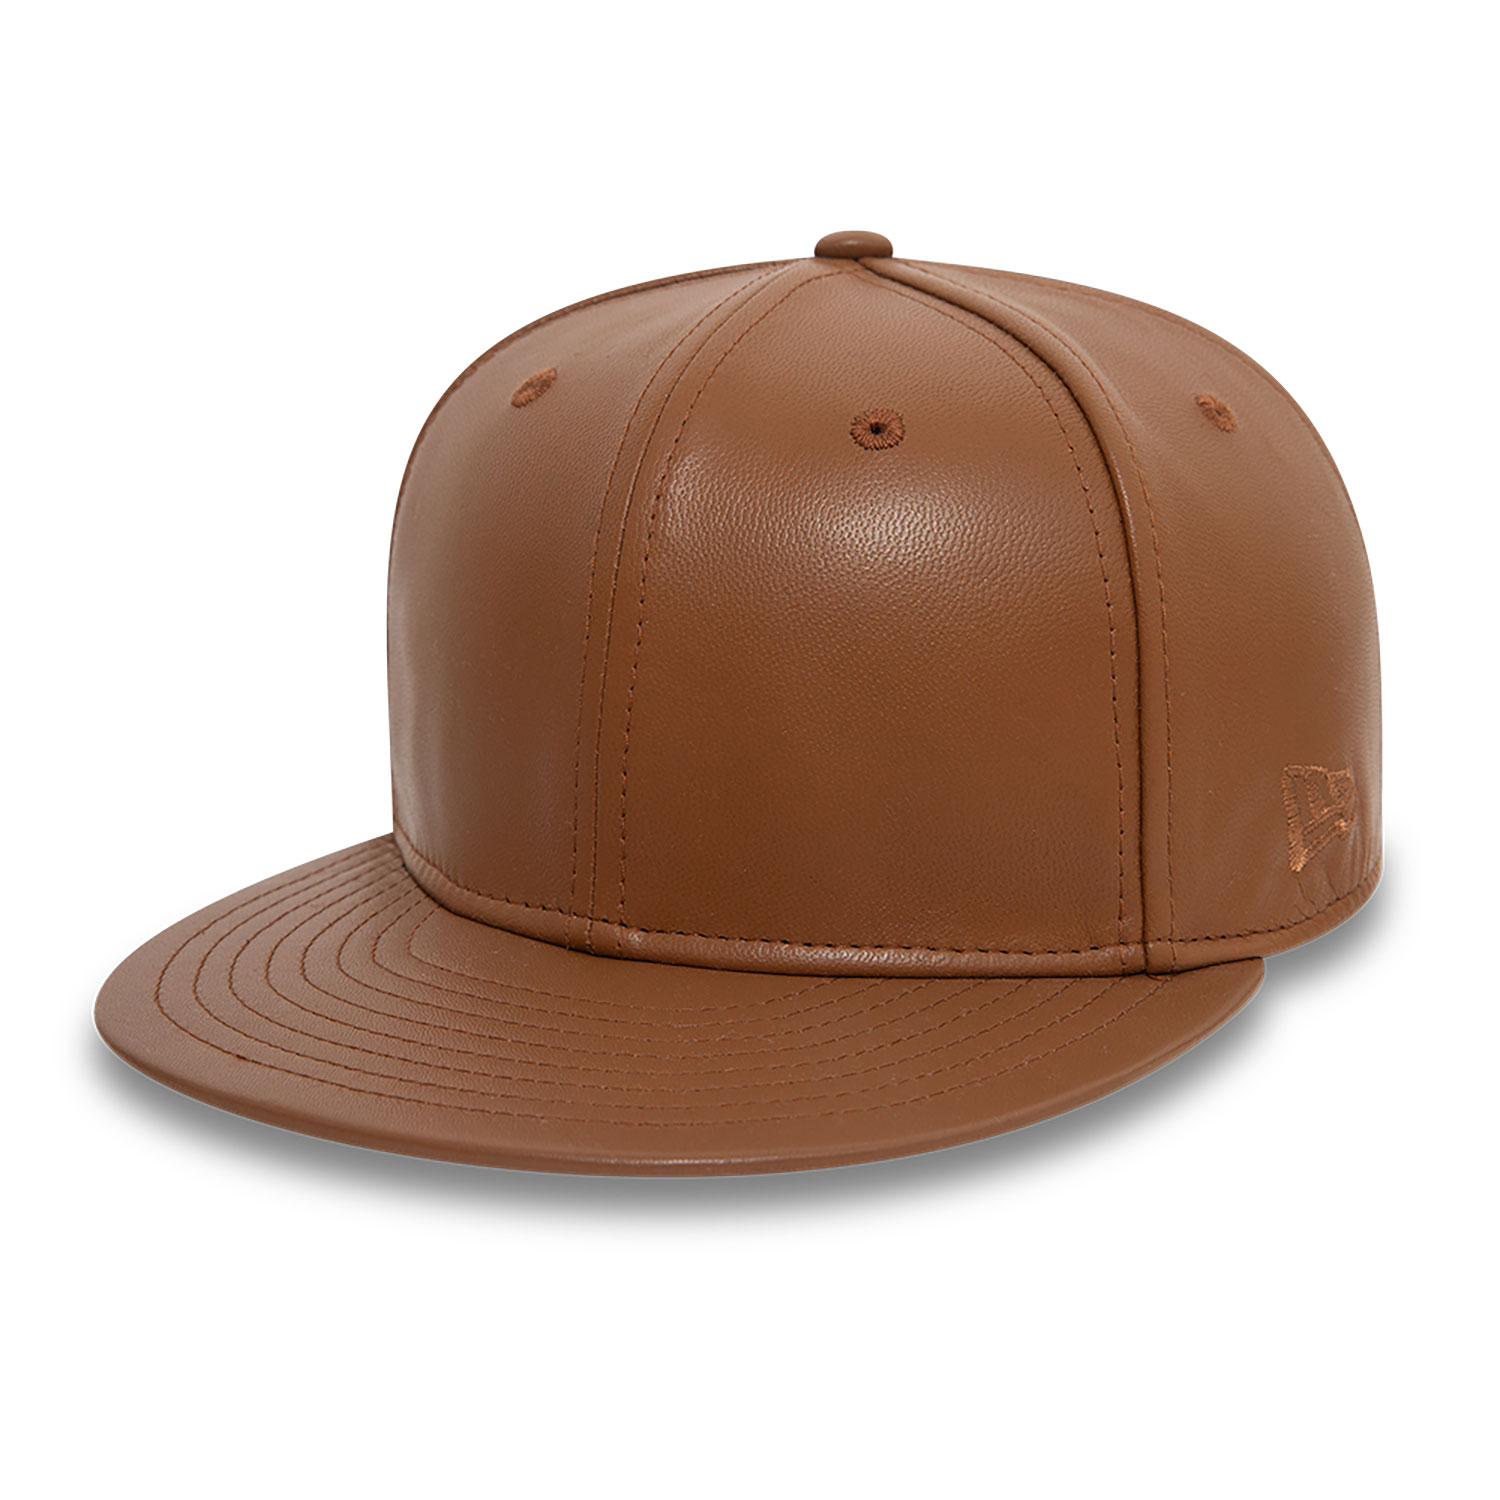 New Era Leather Tan 59FIFTY Fitted Cap